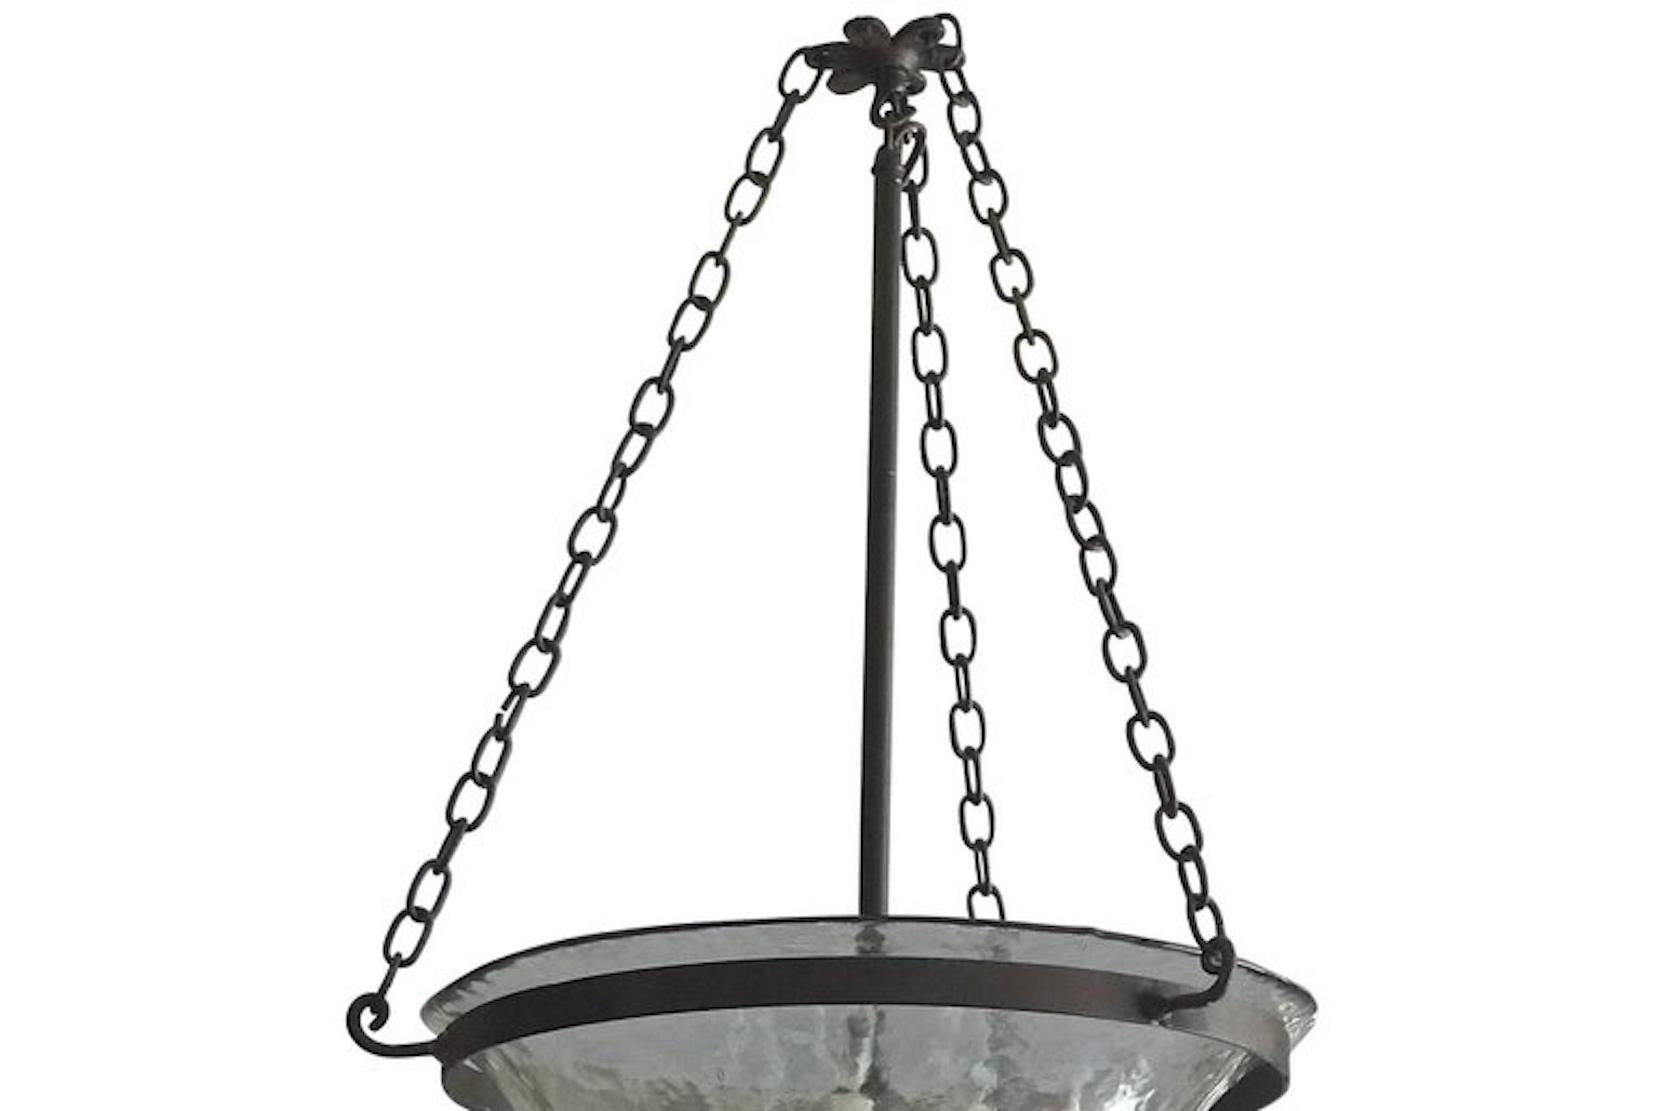 French 19th century bell jar pendant with contemporary iron chain fittings, three-light cluster and frosted glass.